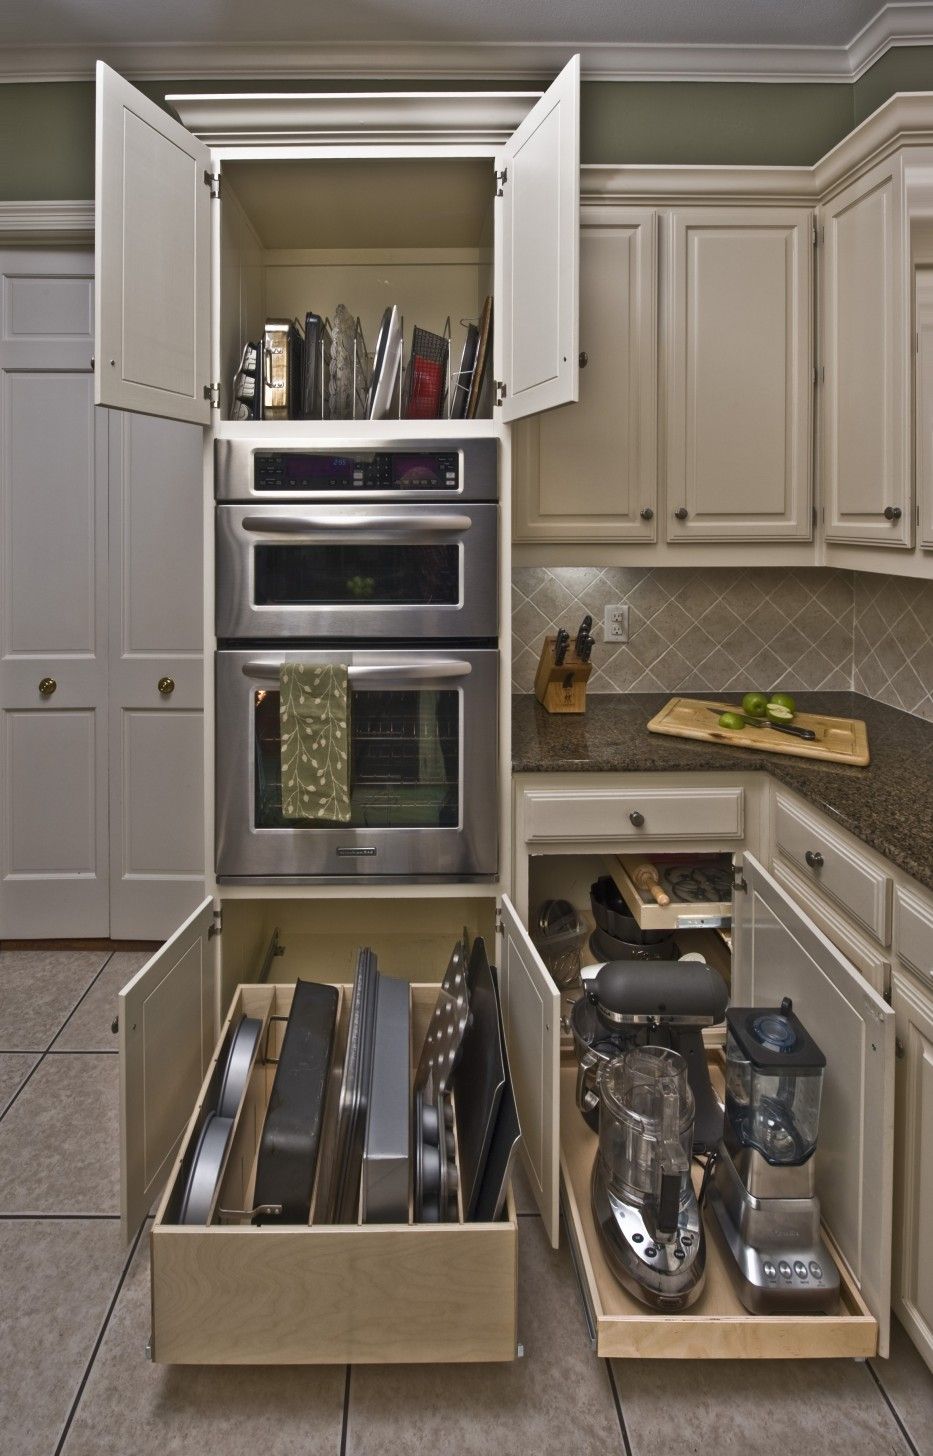 Organizing Kitchen Storage Systems and Pantry for Ultimate Comfort. Classic designed kitchen with long retractable shelves